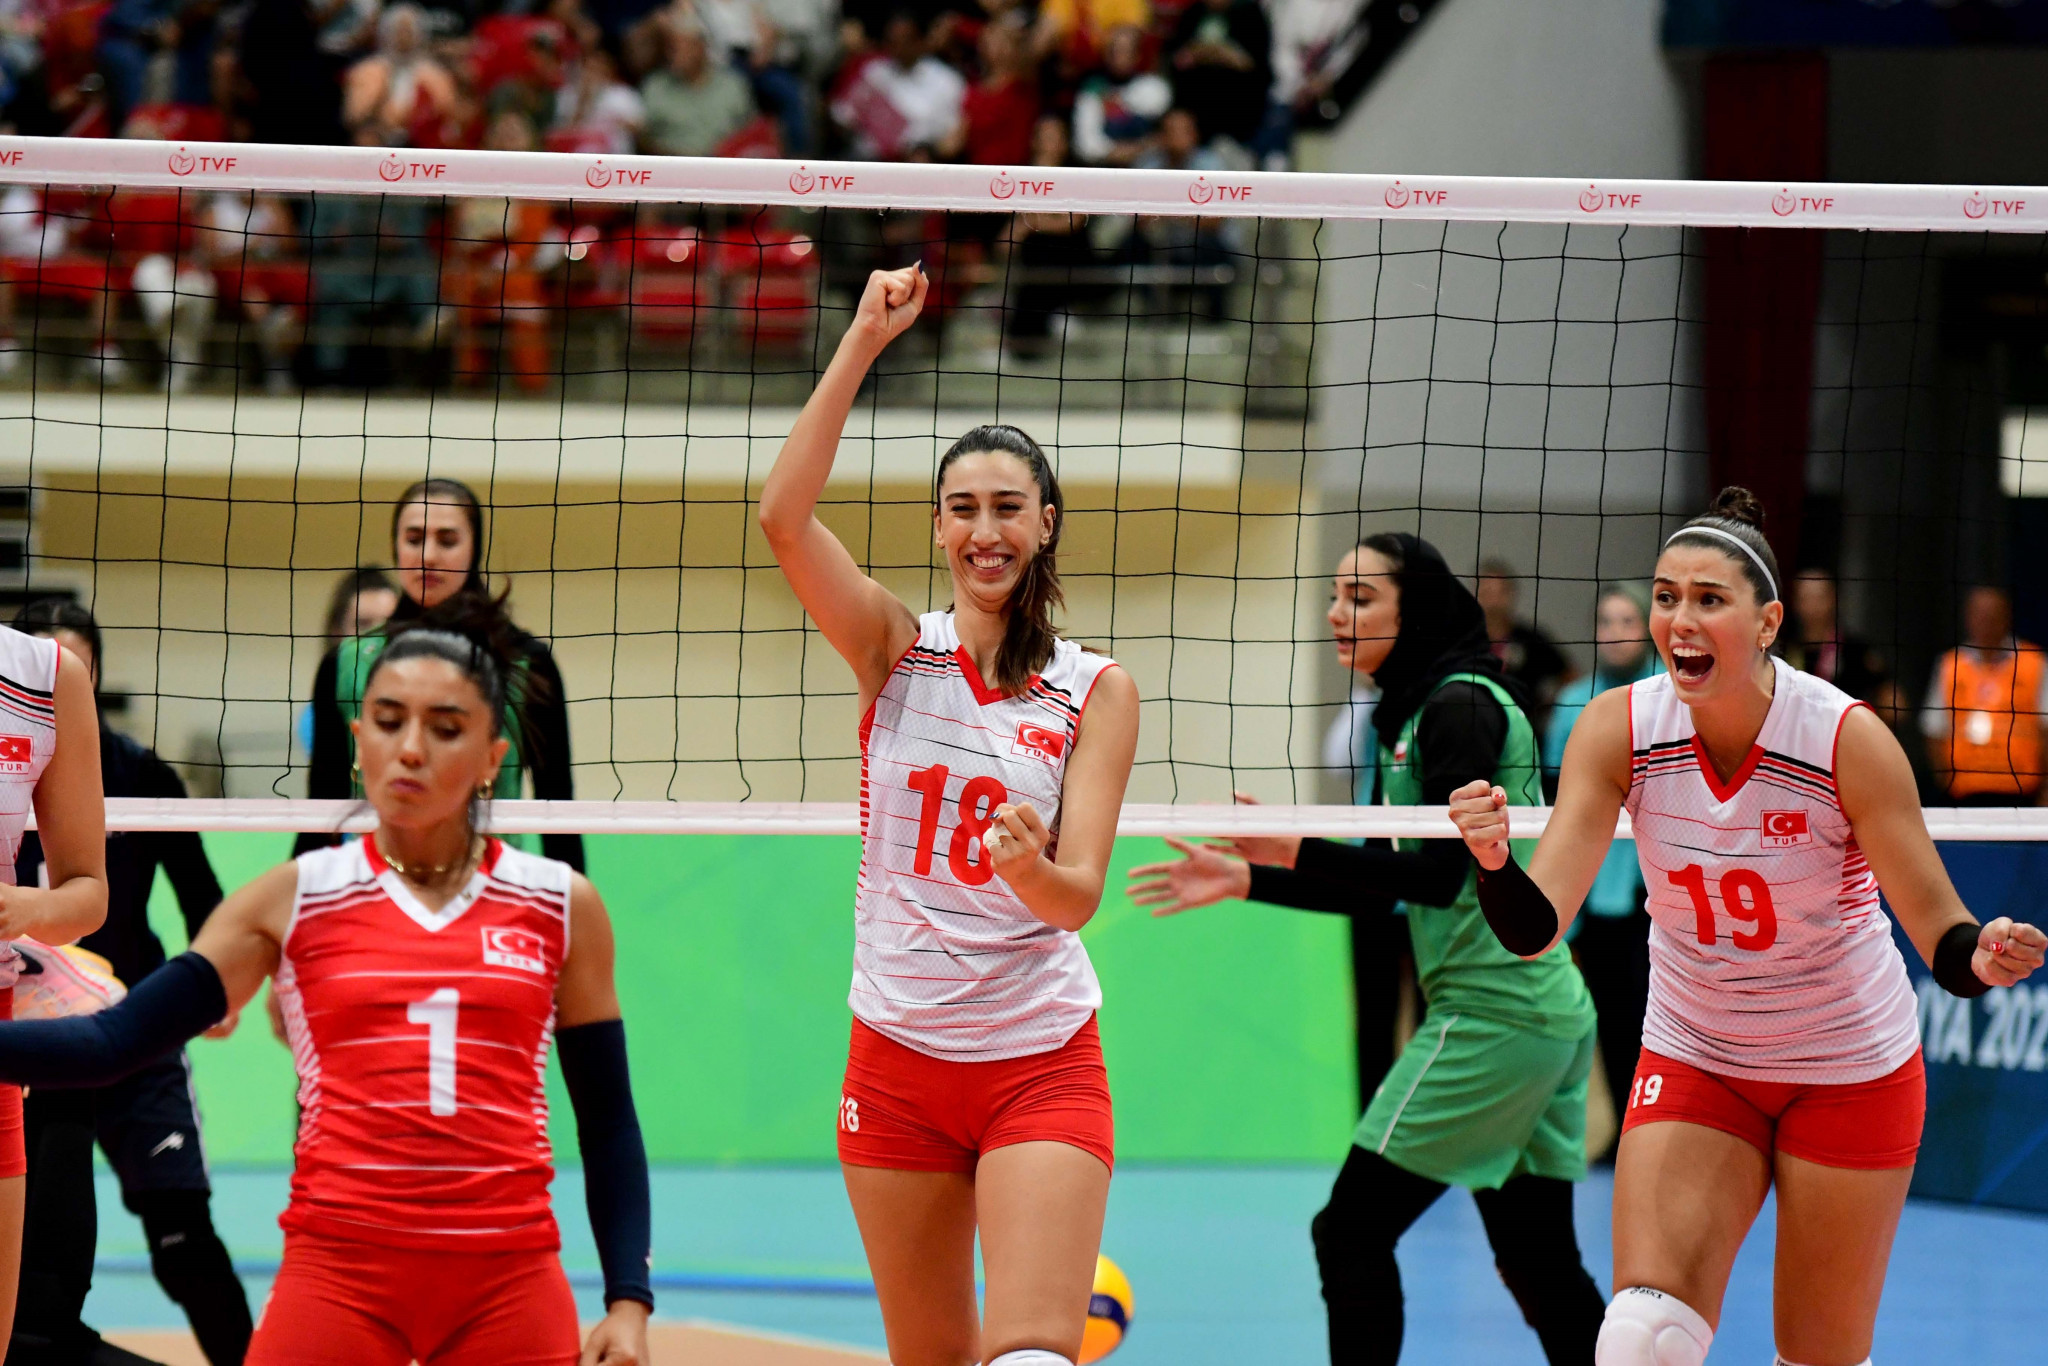 Turkey saw off Iran in straight sets to win women's volleyball gold in front of a big crowd ©Konya 2021